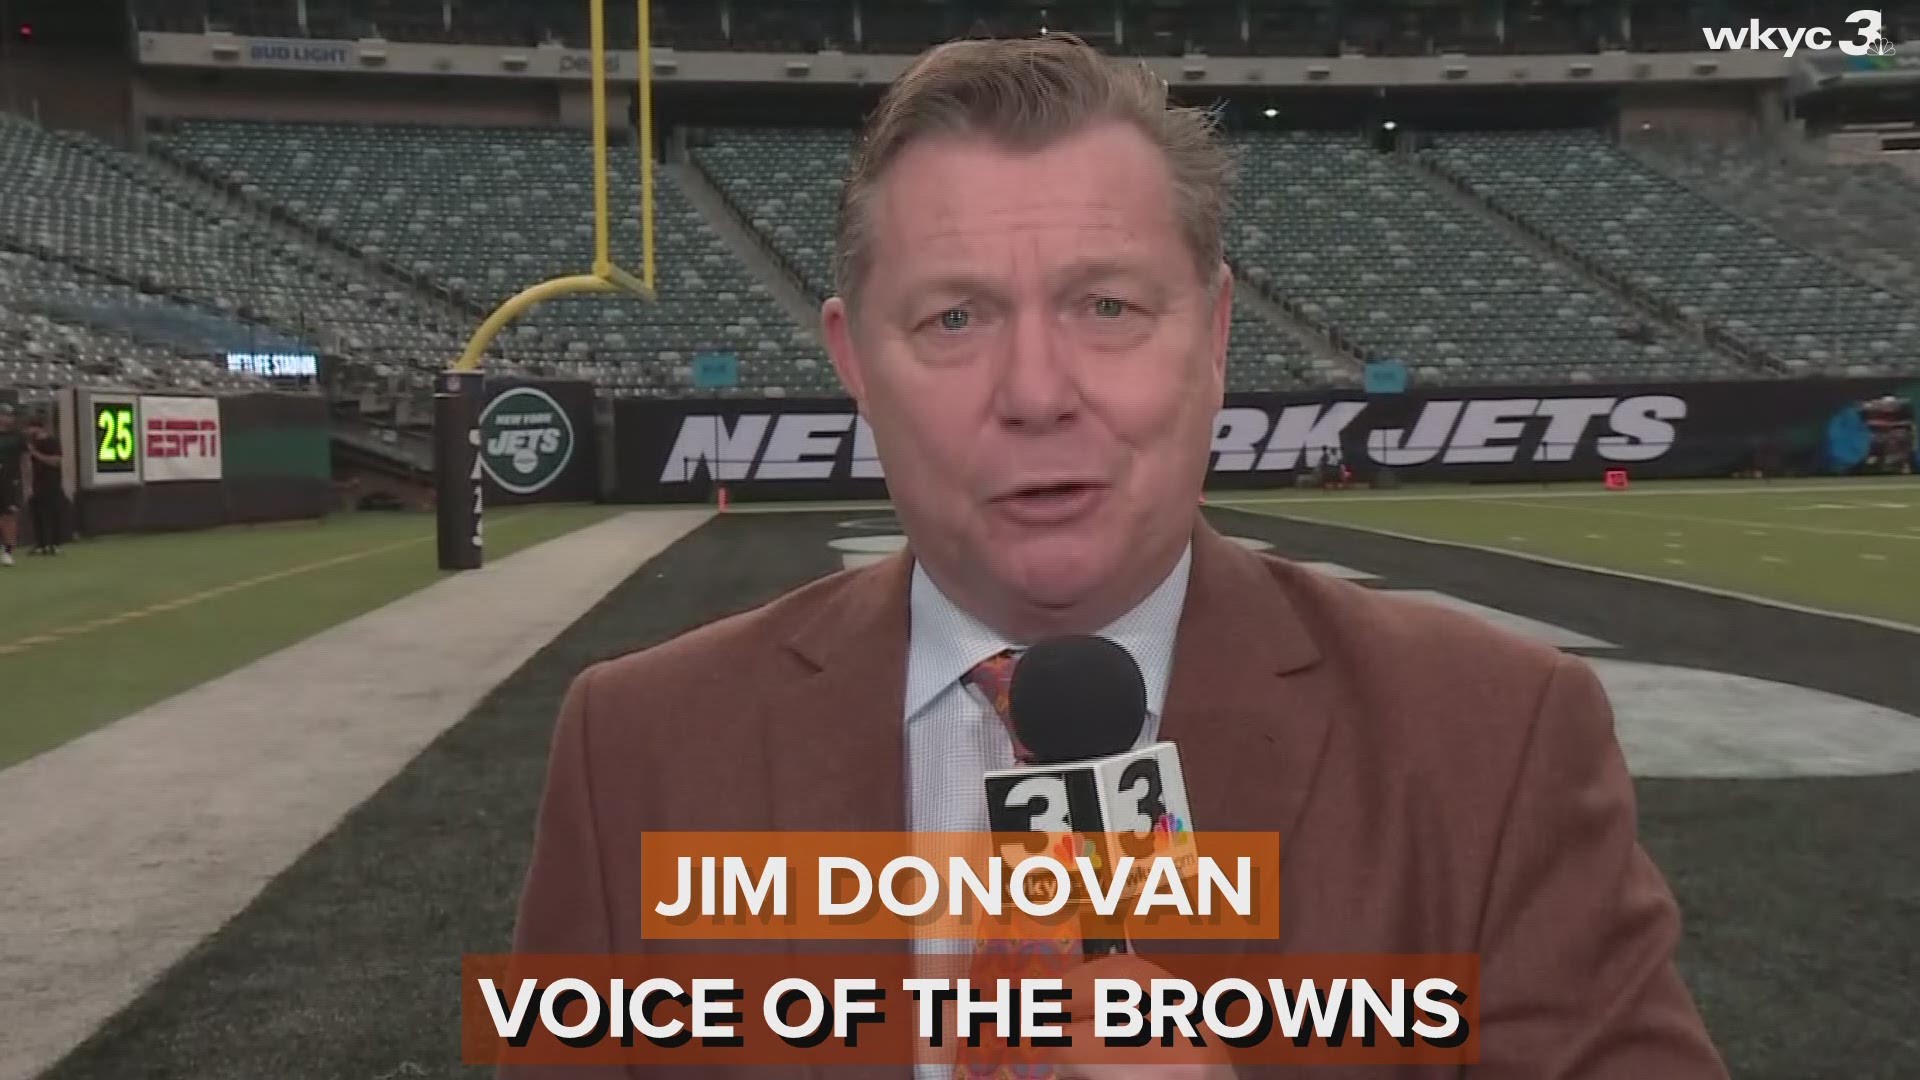 What are the keys to a Browns victory?  Voice of the Browns Jim Donovan tells us what it will take for Cleveland to get their first win of the season.